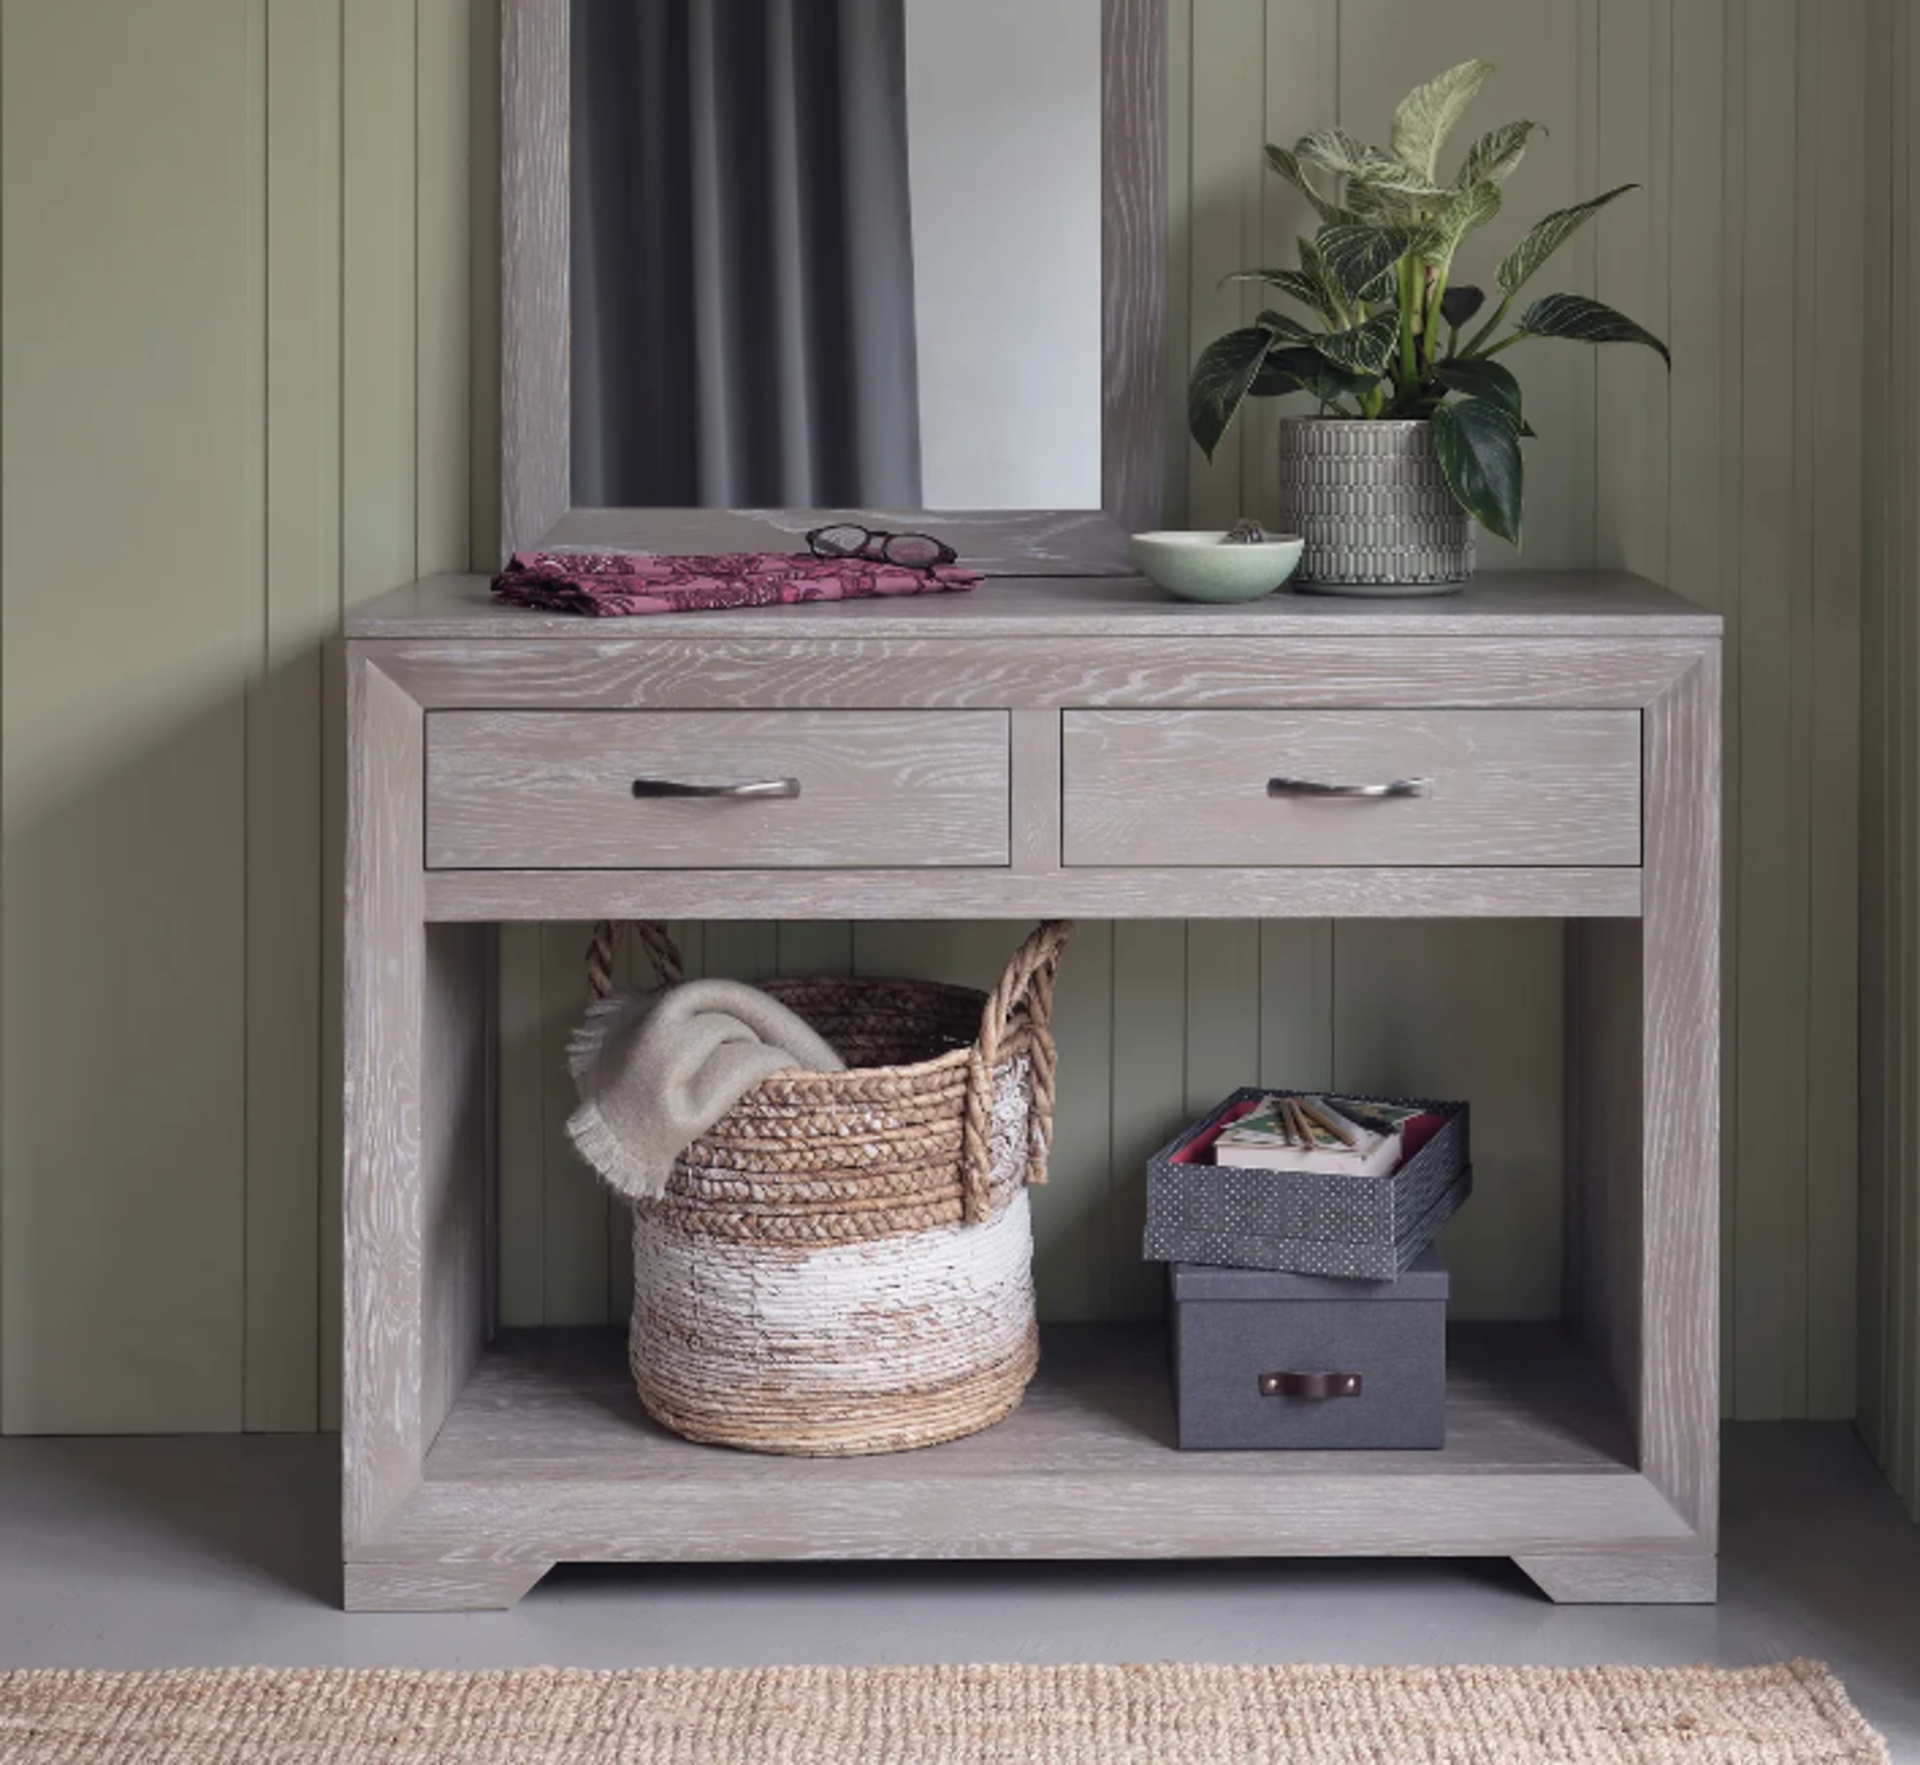 WILLOW Solid Oak with Grey Wash Console Table. RRP £399.99. Console tables are a great way of adding